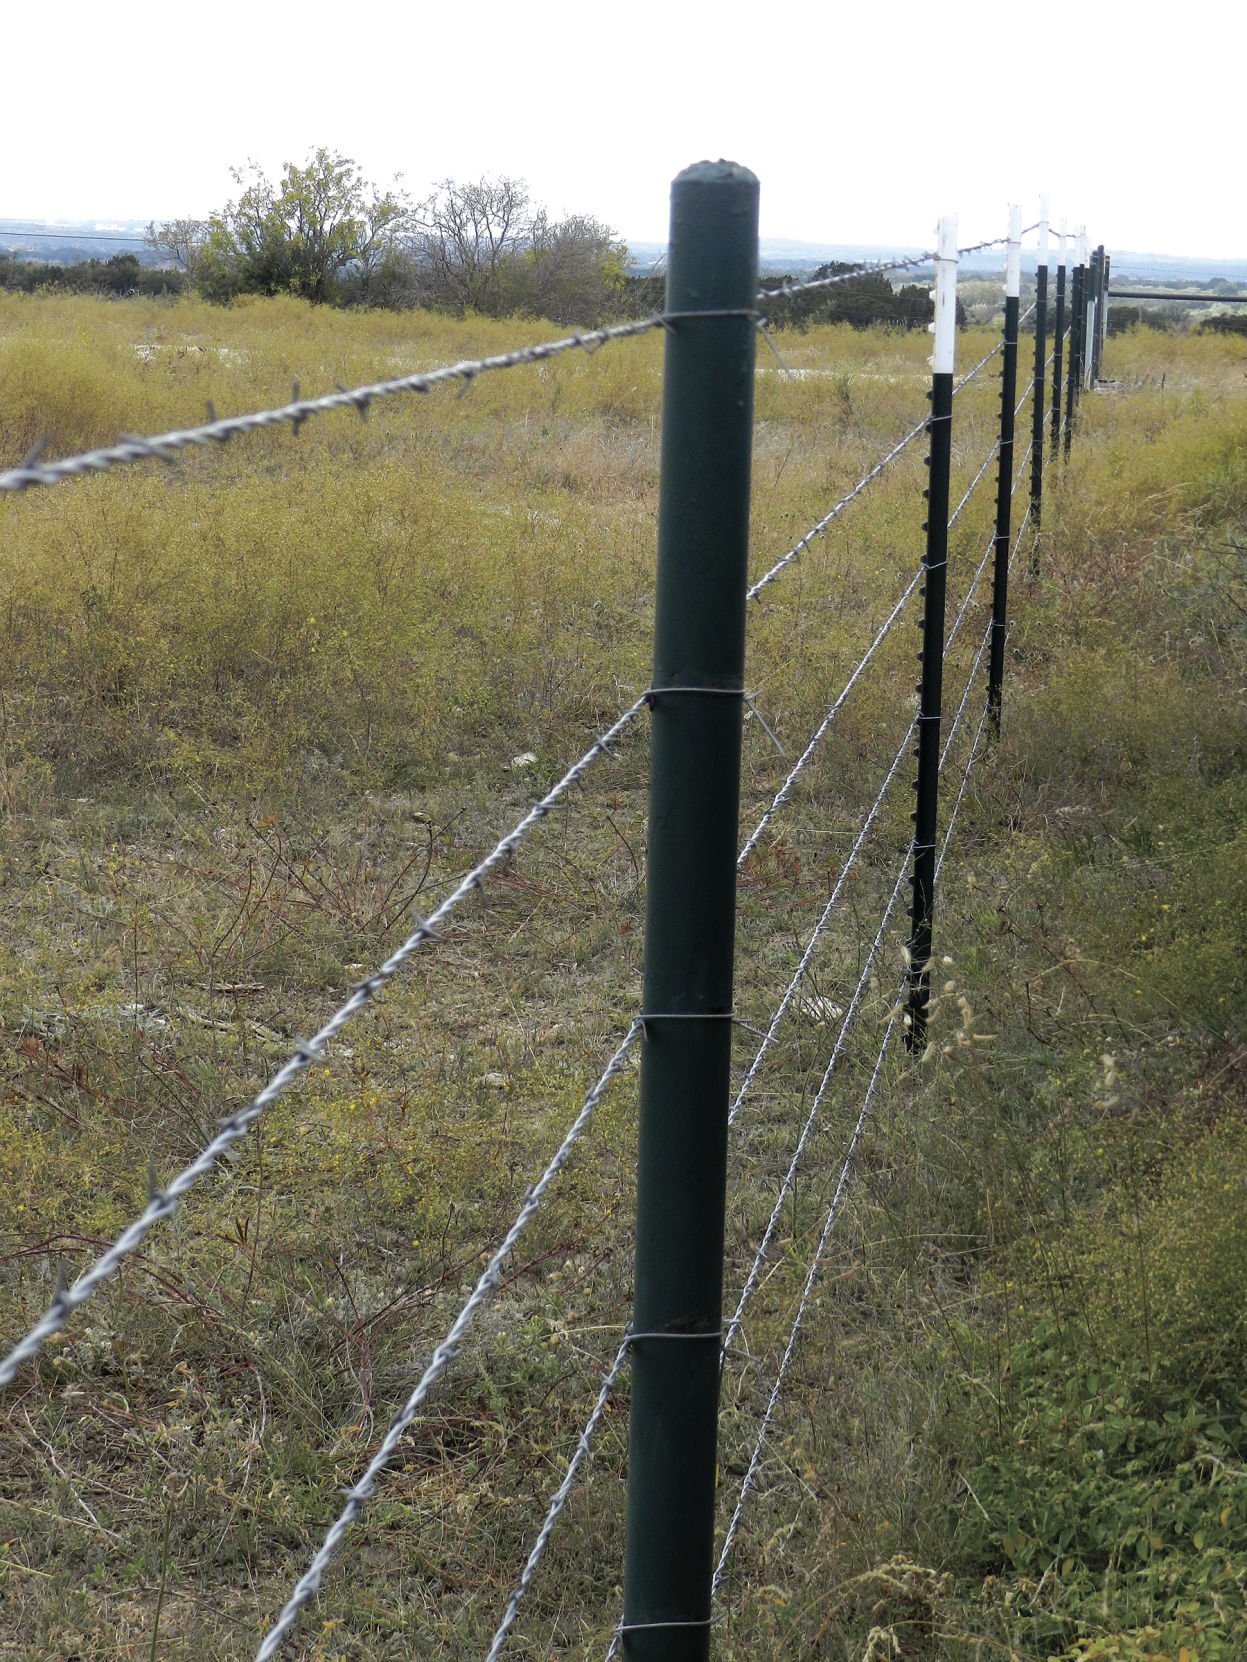 bob wire and the fence posts